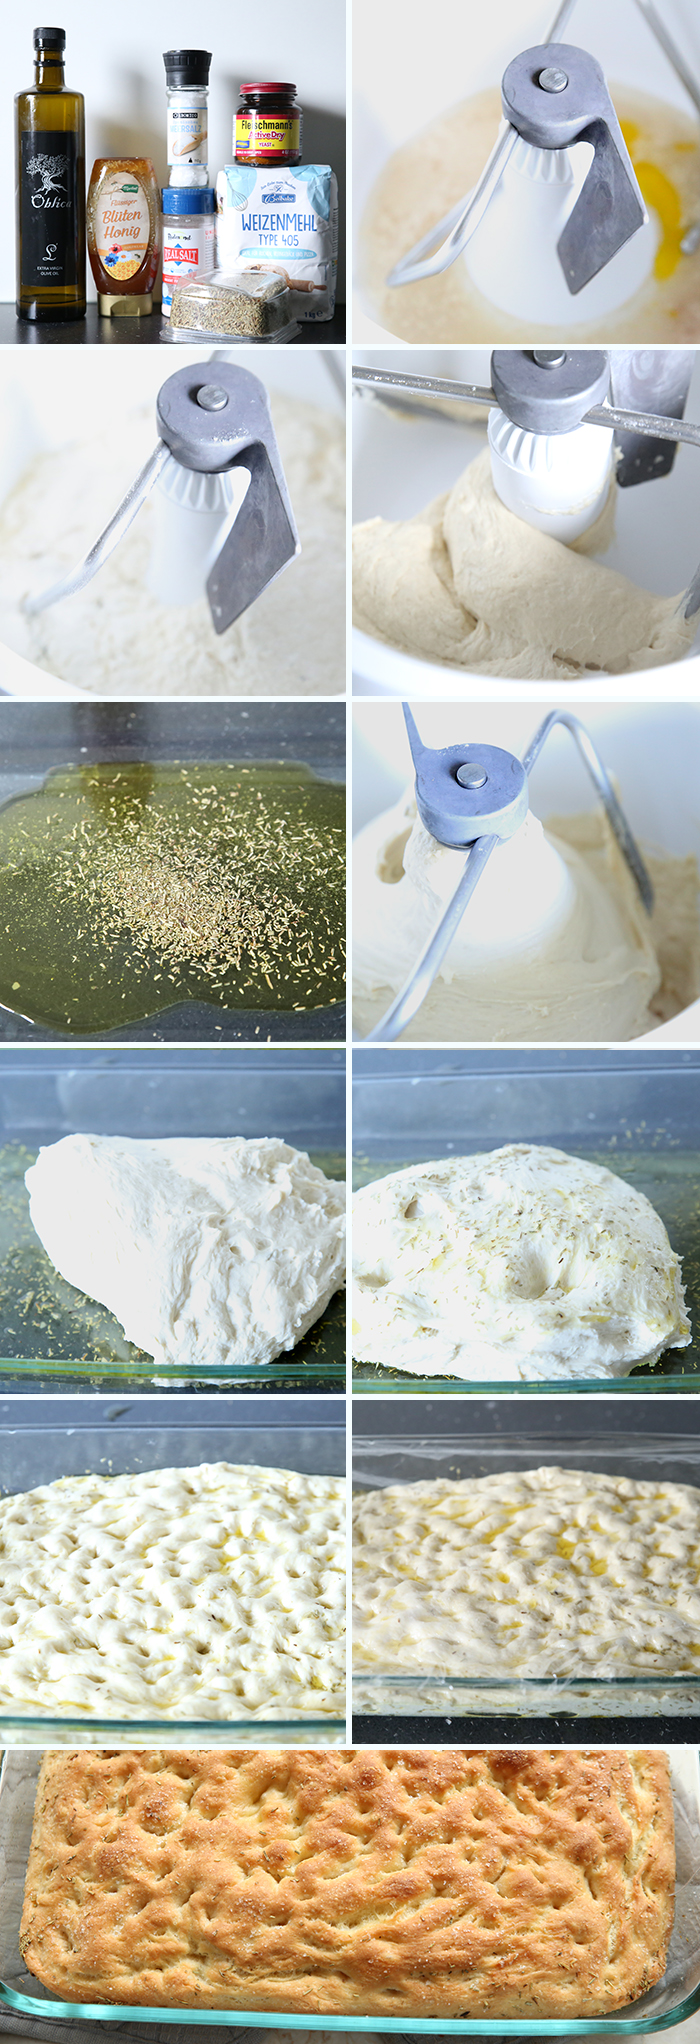 11-photo picture collage of step-by-step photos on how to make Focaccia Bread Recipe.